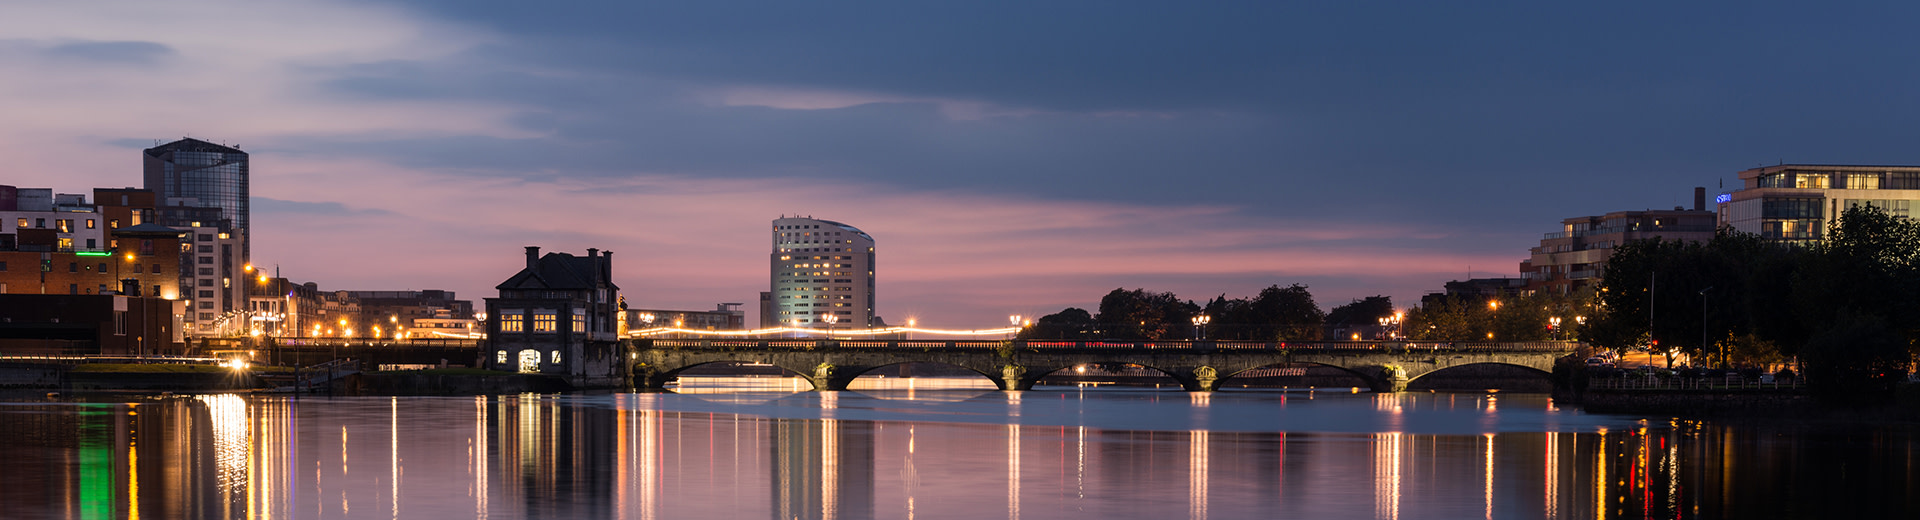 In the early evening, the skyline of Limerick stands silhouetted against the sky.